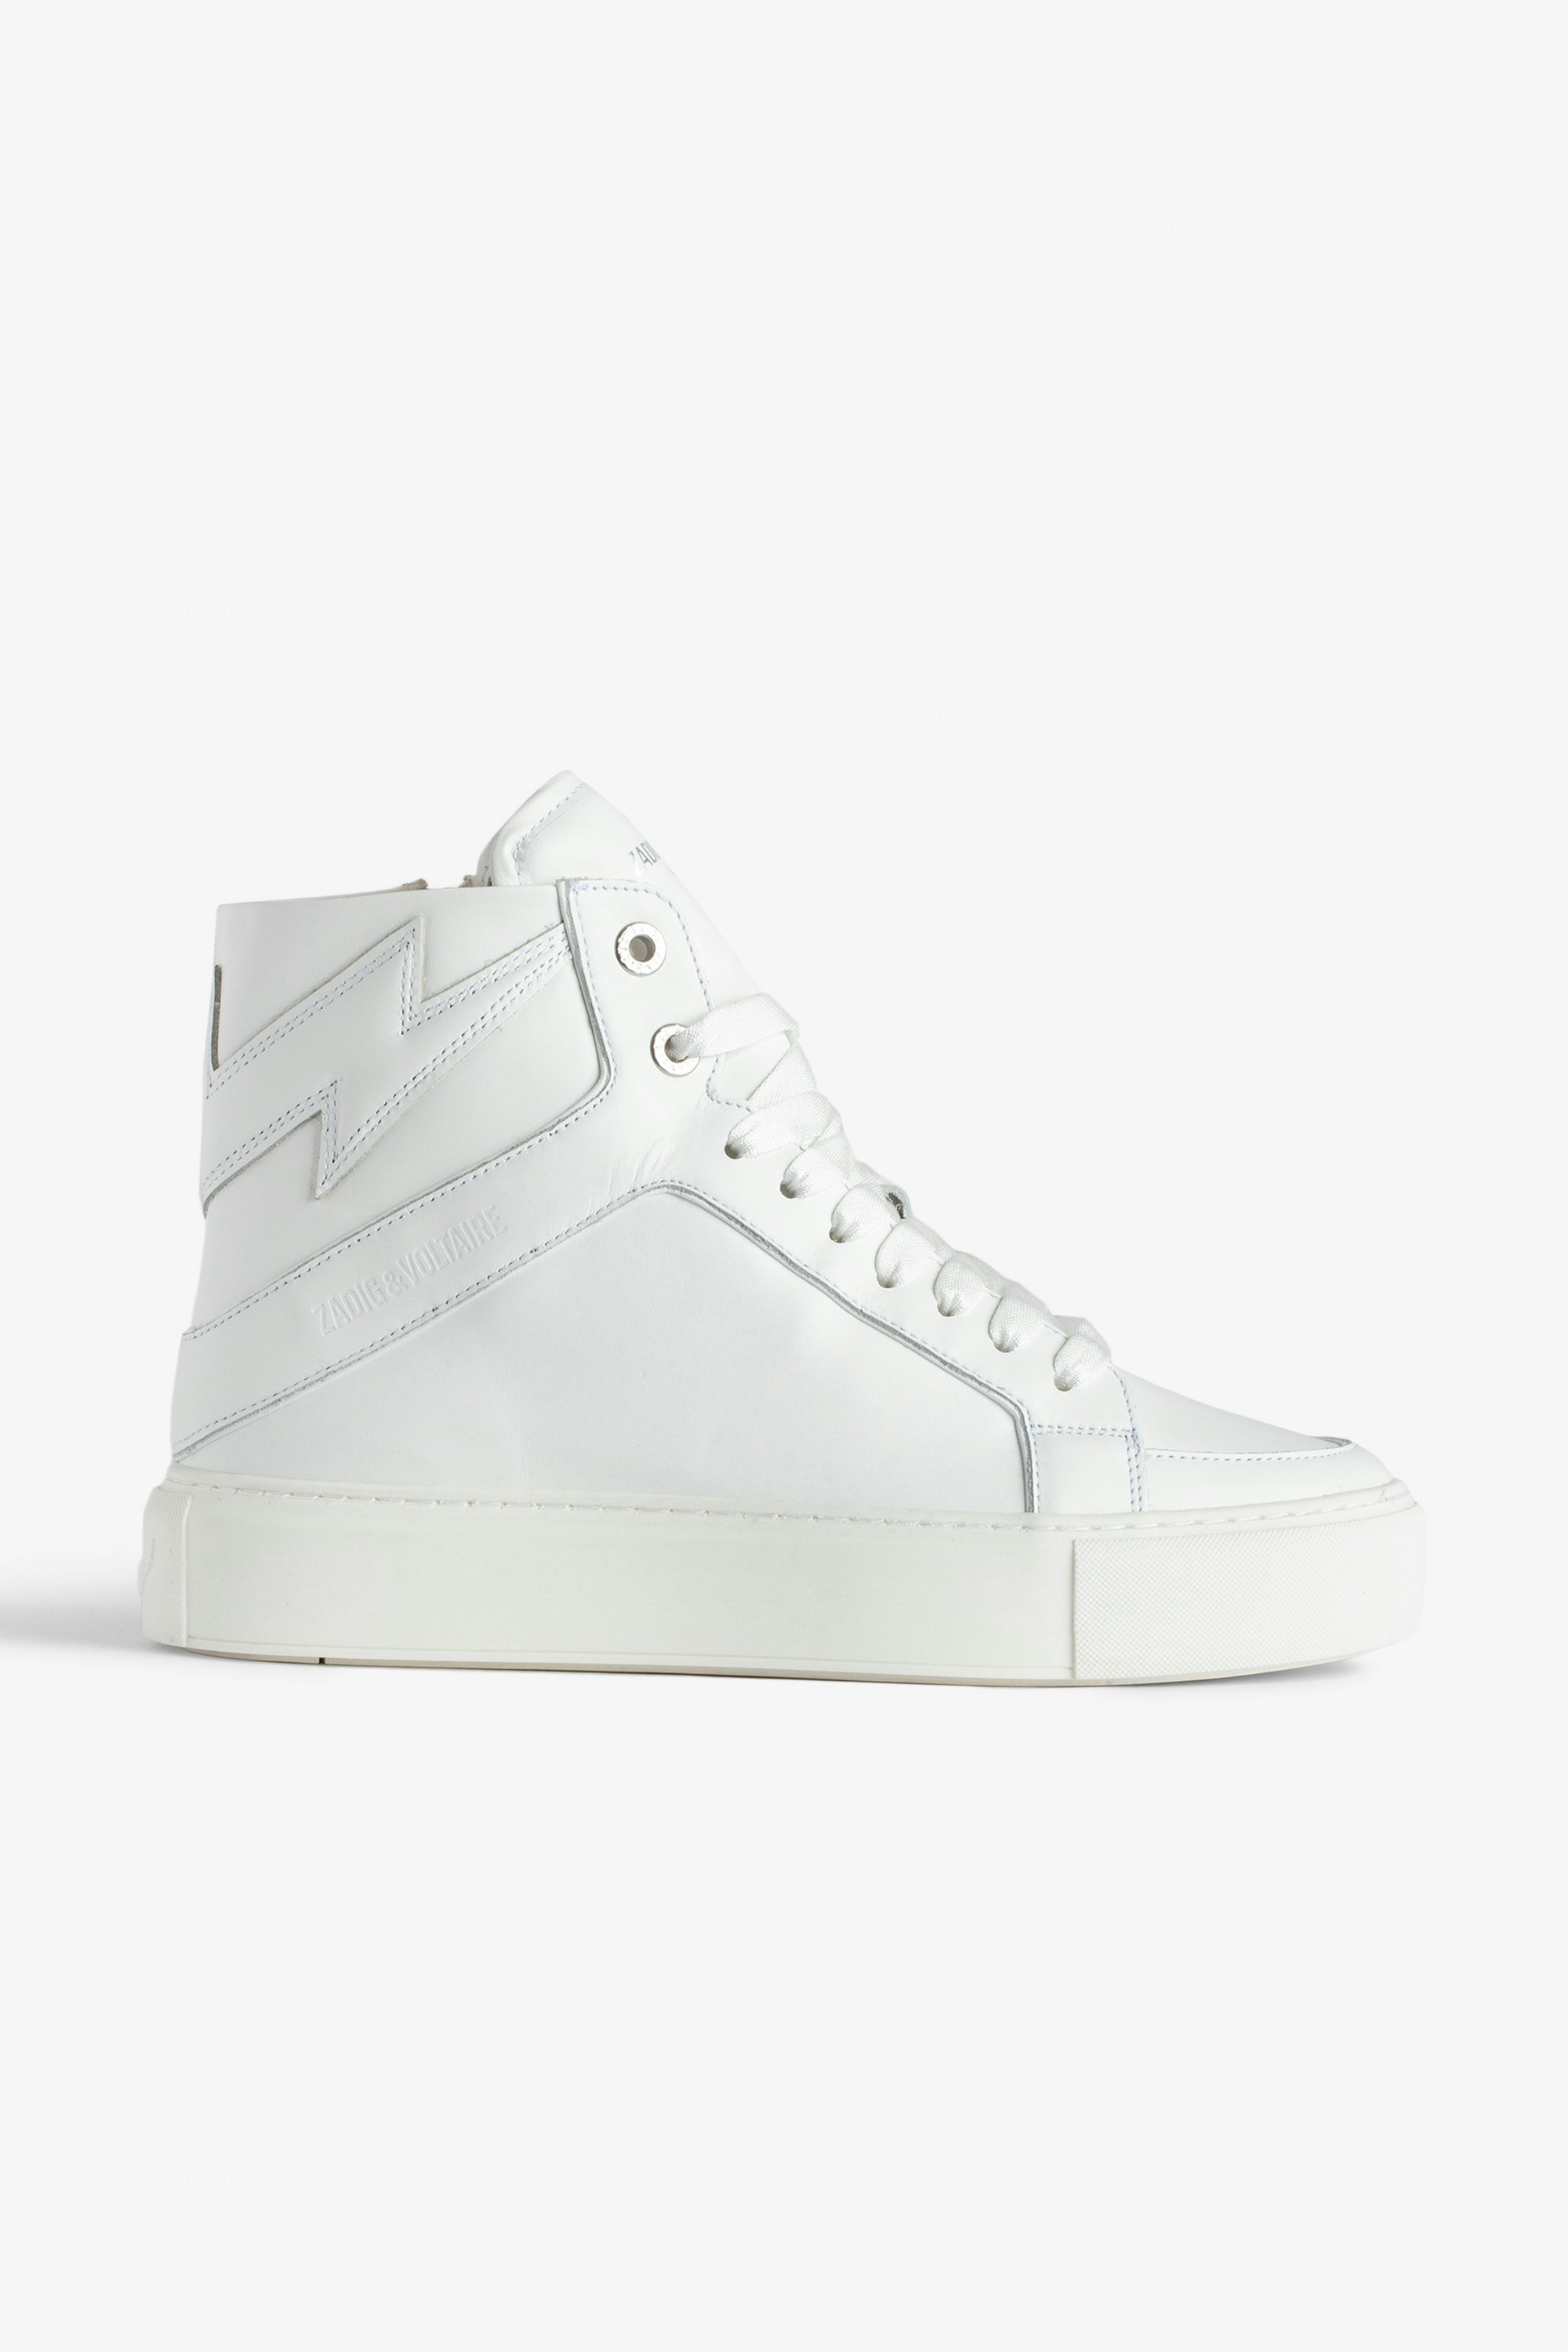 ZV1747 High Flash High-Top Platform Trainers Women’s white smooth leather high-top trainers with lightning bolt panels and chunky sole.